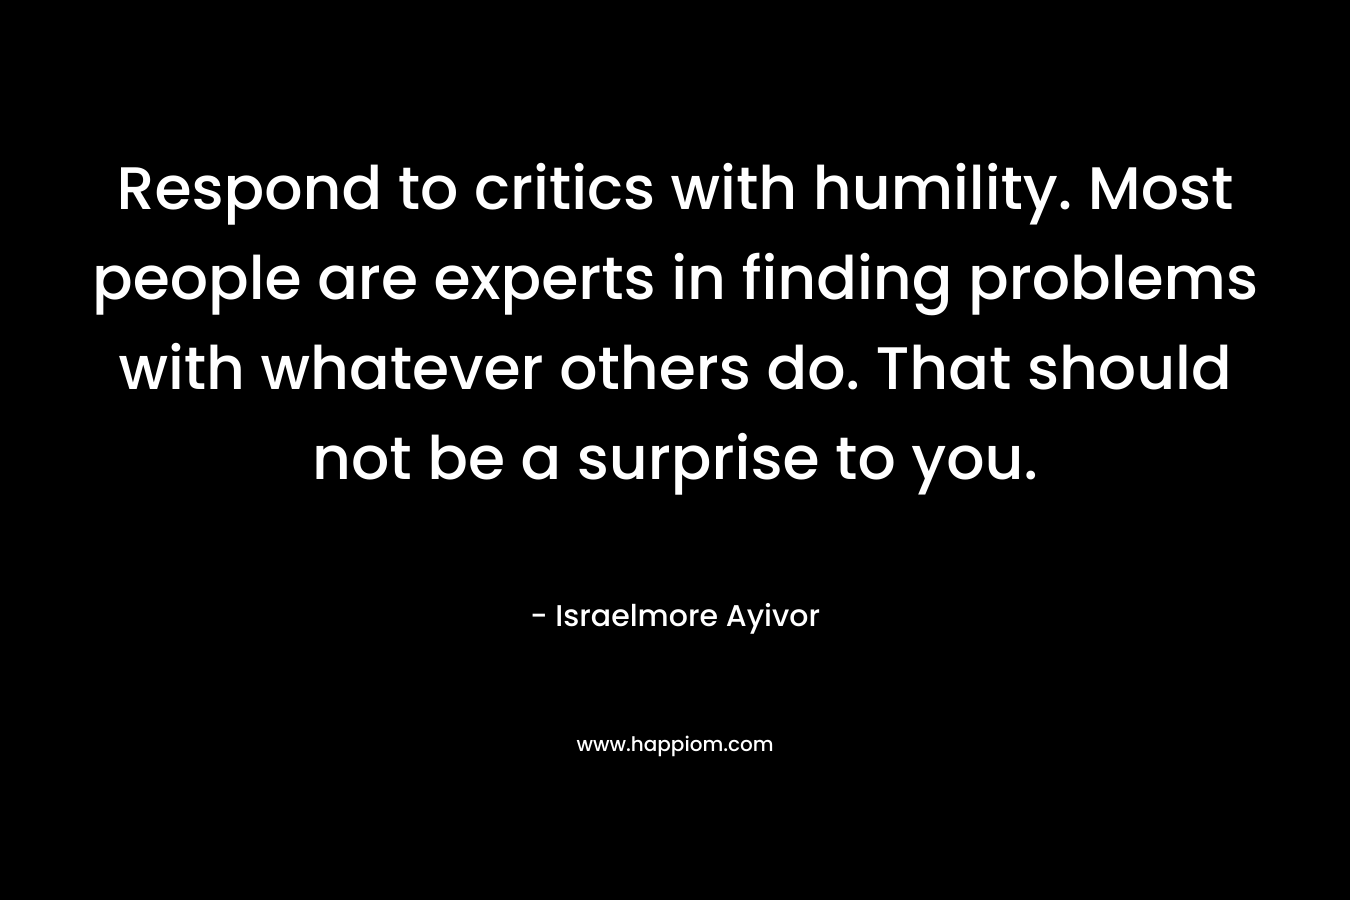 Respond to critics with humility. Most people are experts in finding problems with whatever others do. That should not be a surprise to you. – Israelmore Ayivor